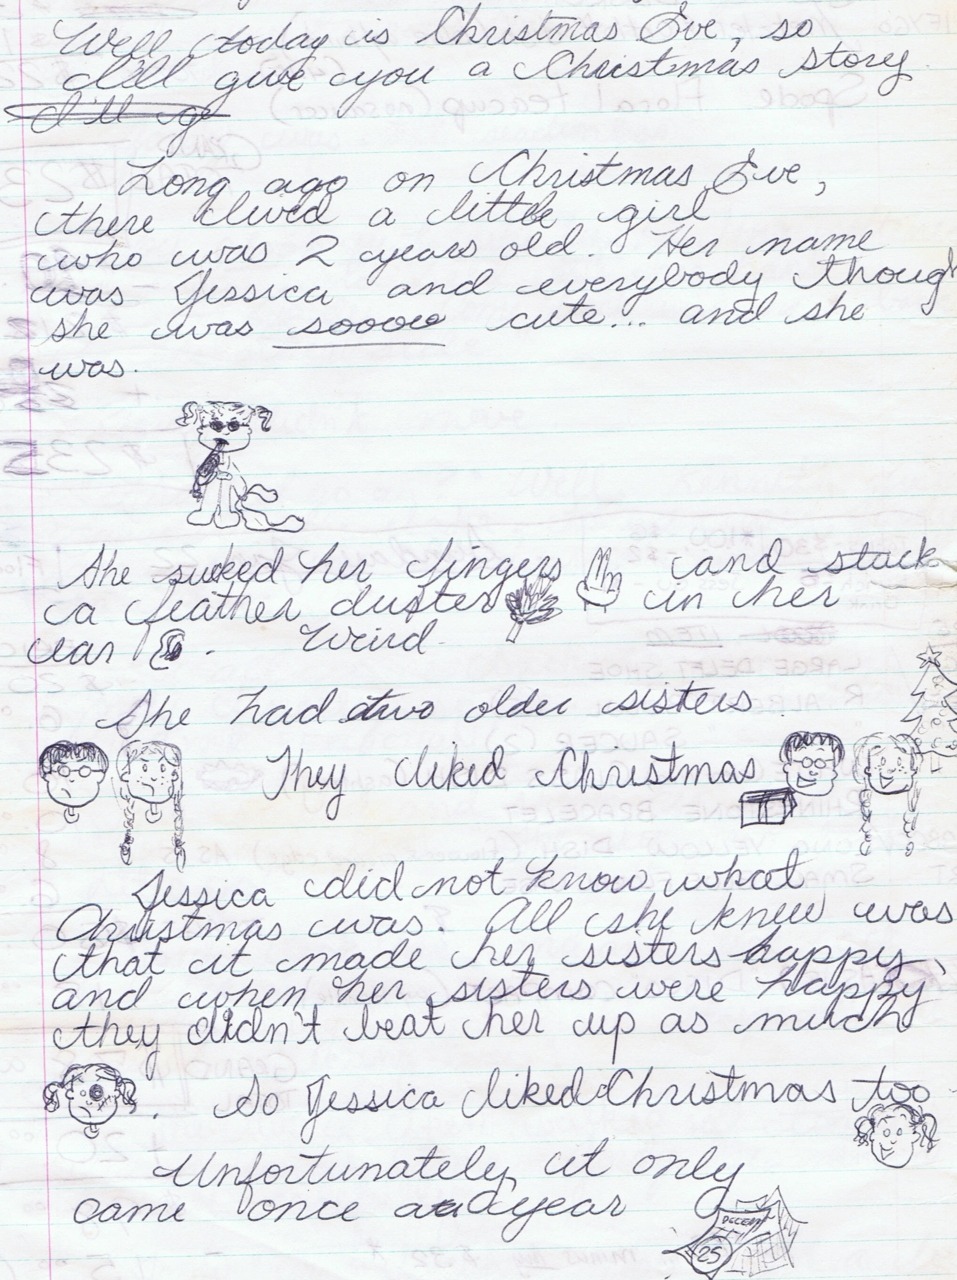 Age 15
A sister Christmastime story (set 10 years in the past) - page 1